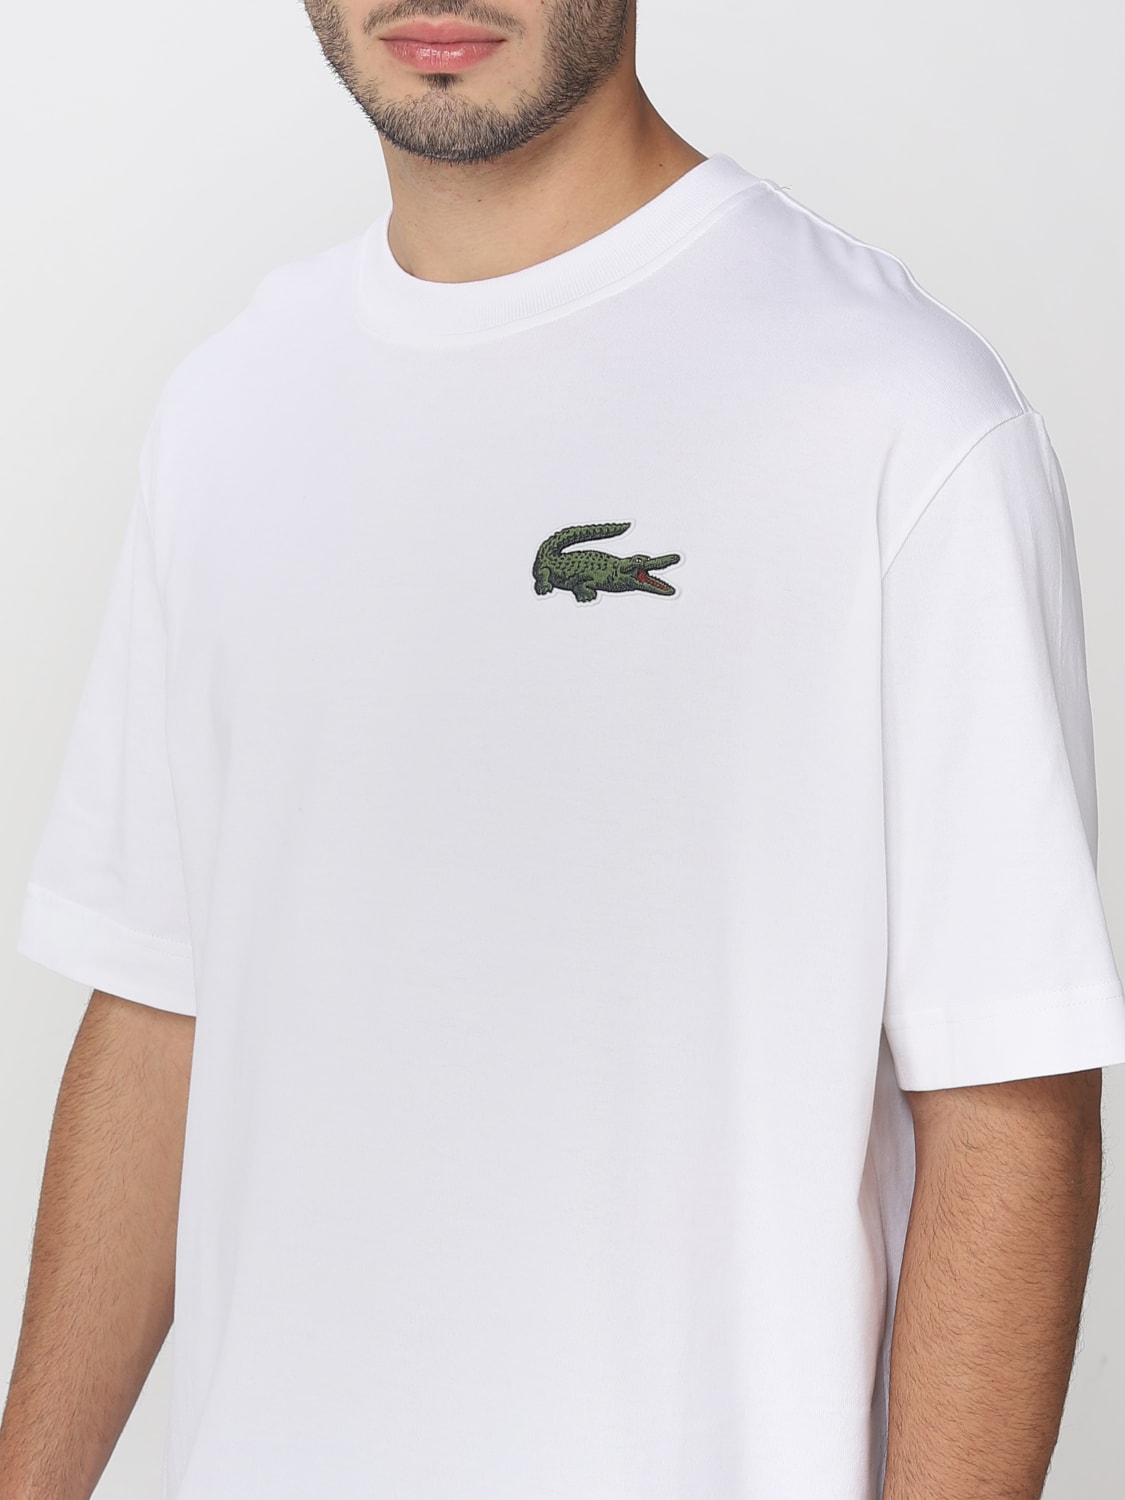 LACOSTE: t-shirt for man - White | Lacoste t-shirt TH0062 online on ...